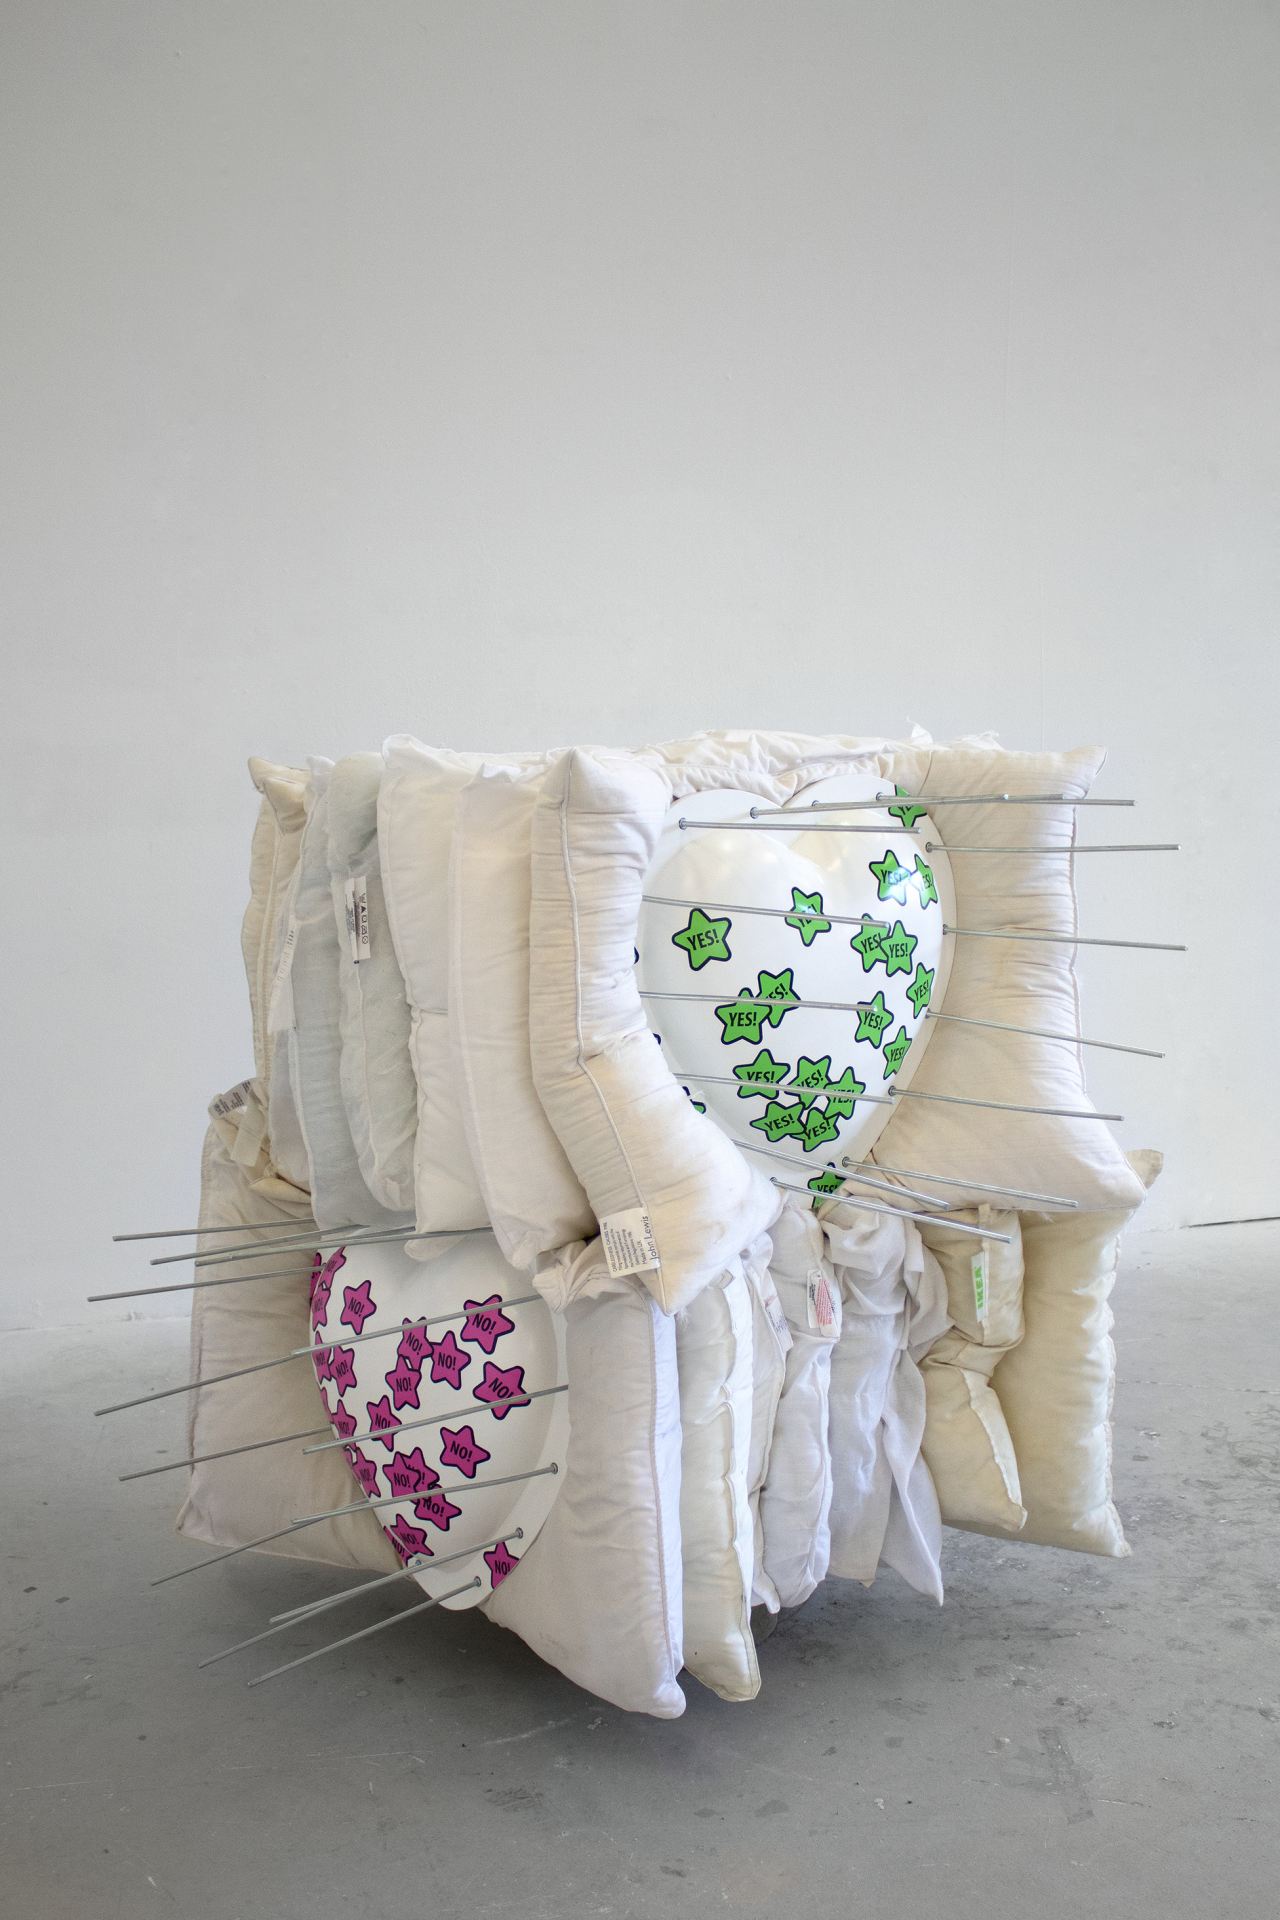 Two piles of pillows stacked one on top of the other and pierced by steel rods between two parts of 3d printed heart shape covered with pink and green star-shaped stickers that read NO! and YES! respectively.